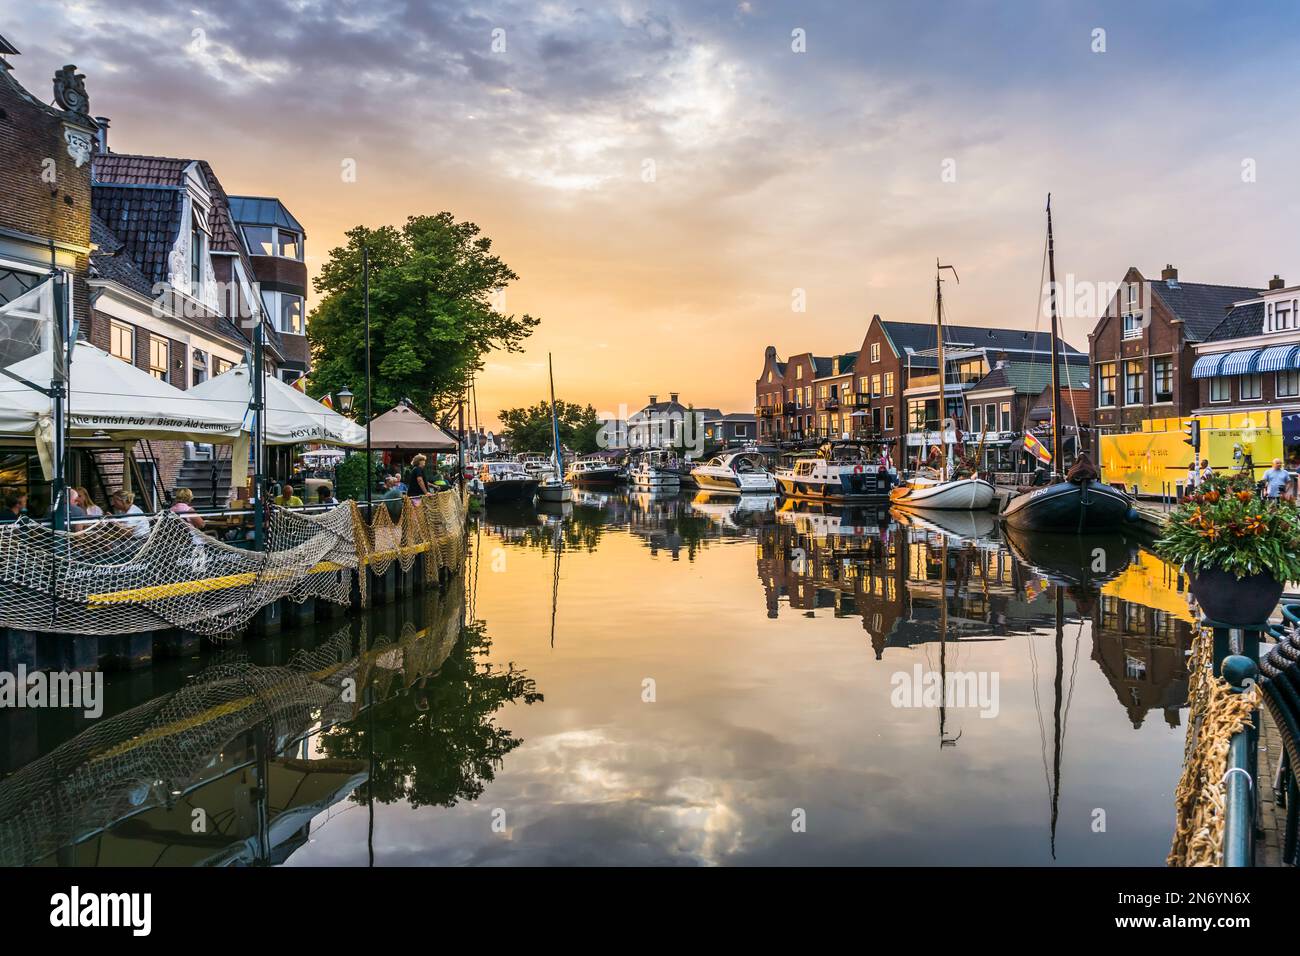 Lemmer, Netherlands - August 15, 2022: View of a water canal in the city of Lemmer in Friesland, Netherlands in beautiful sunset light Stock Photo